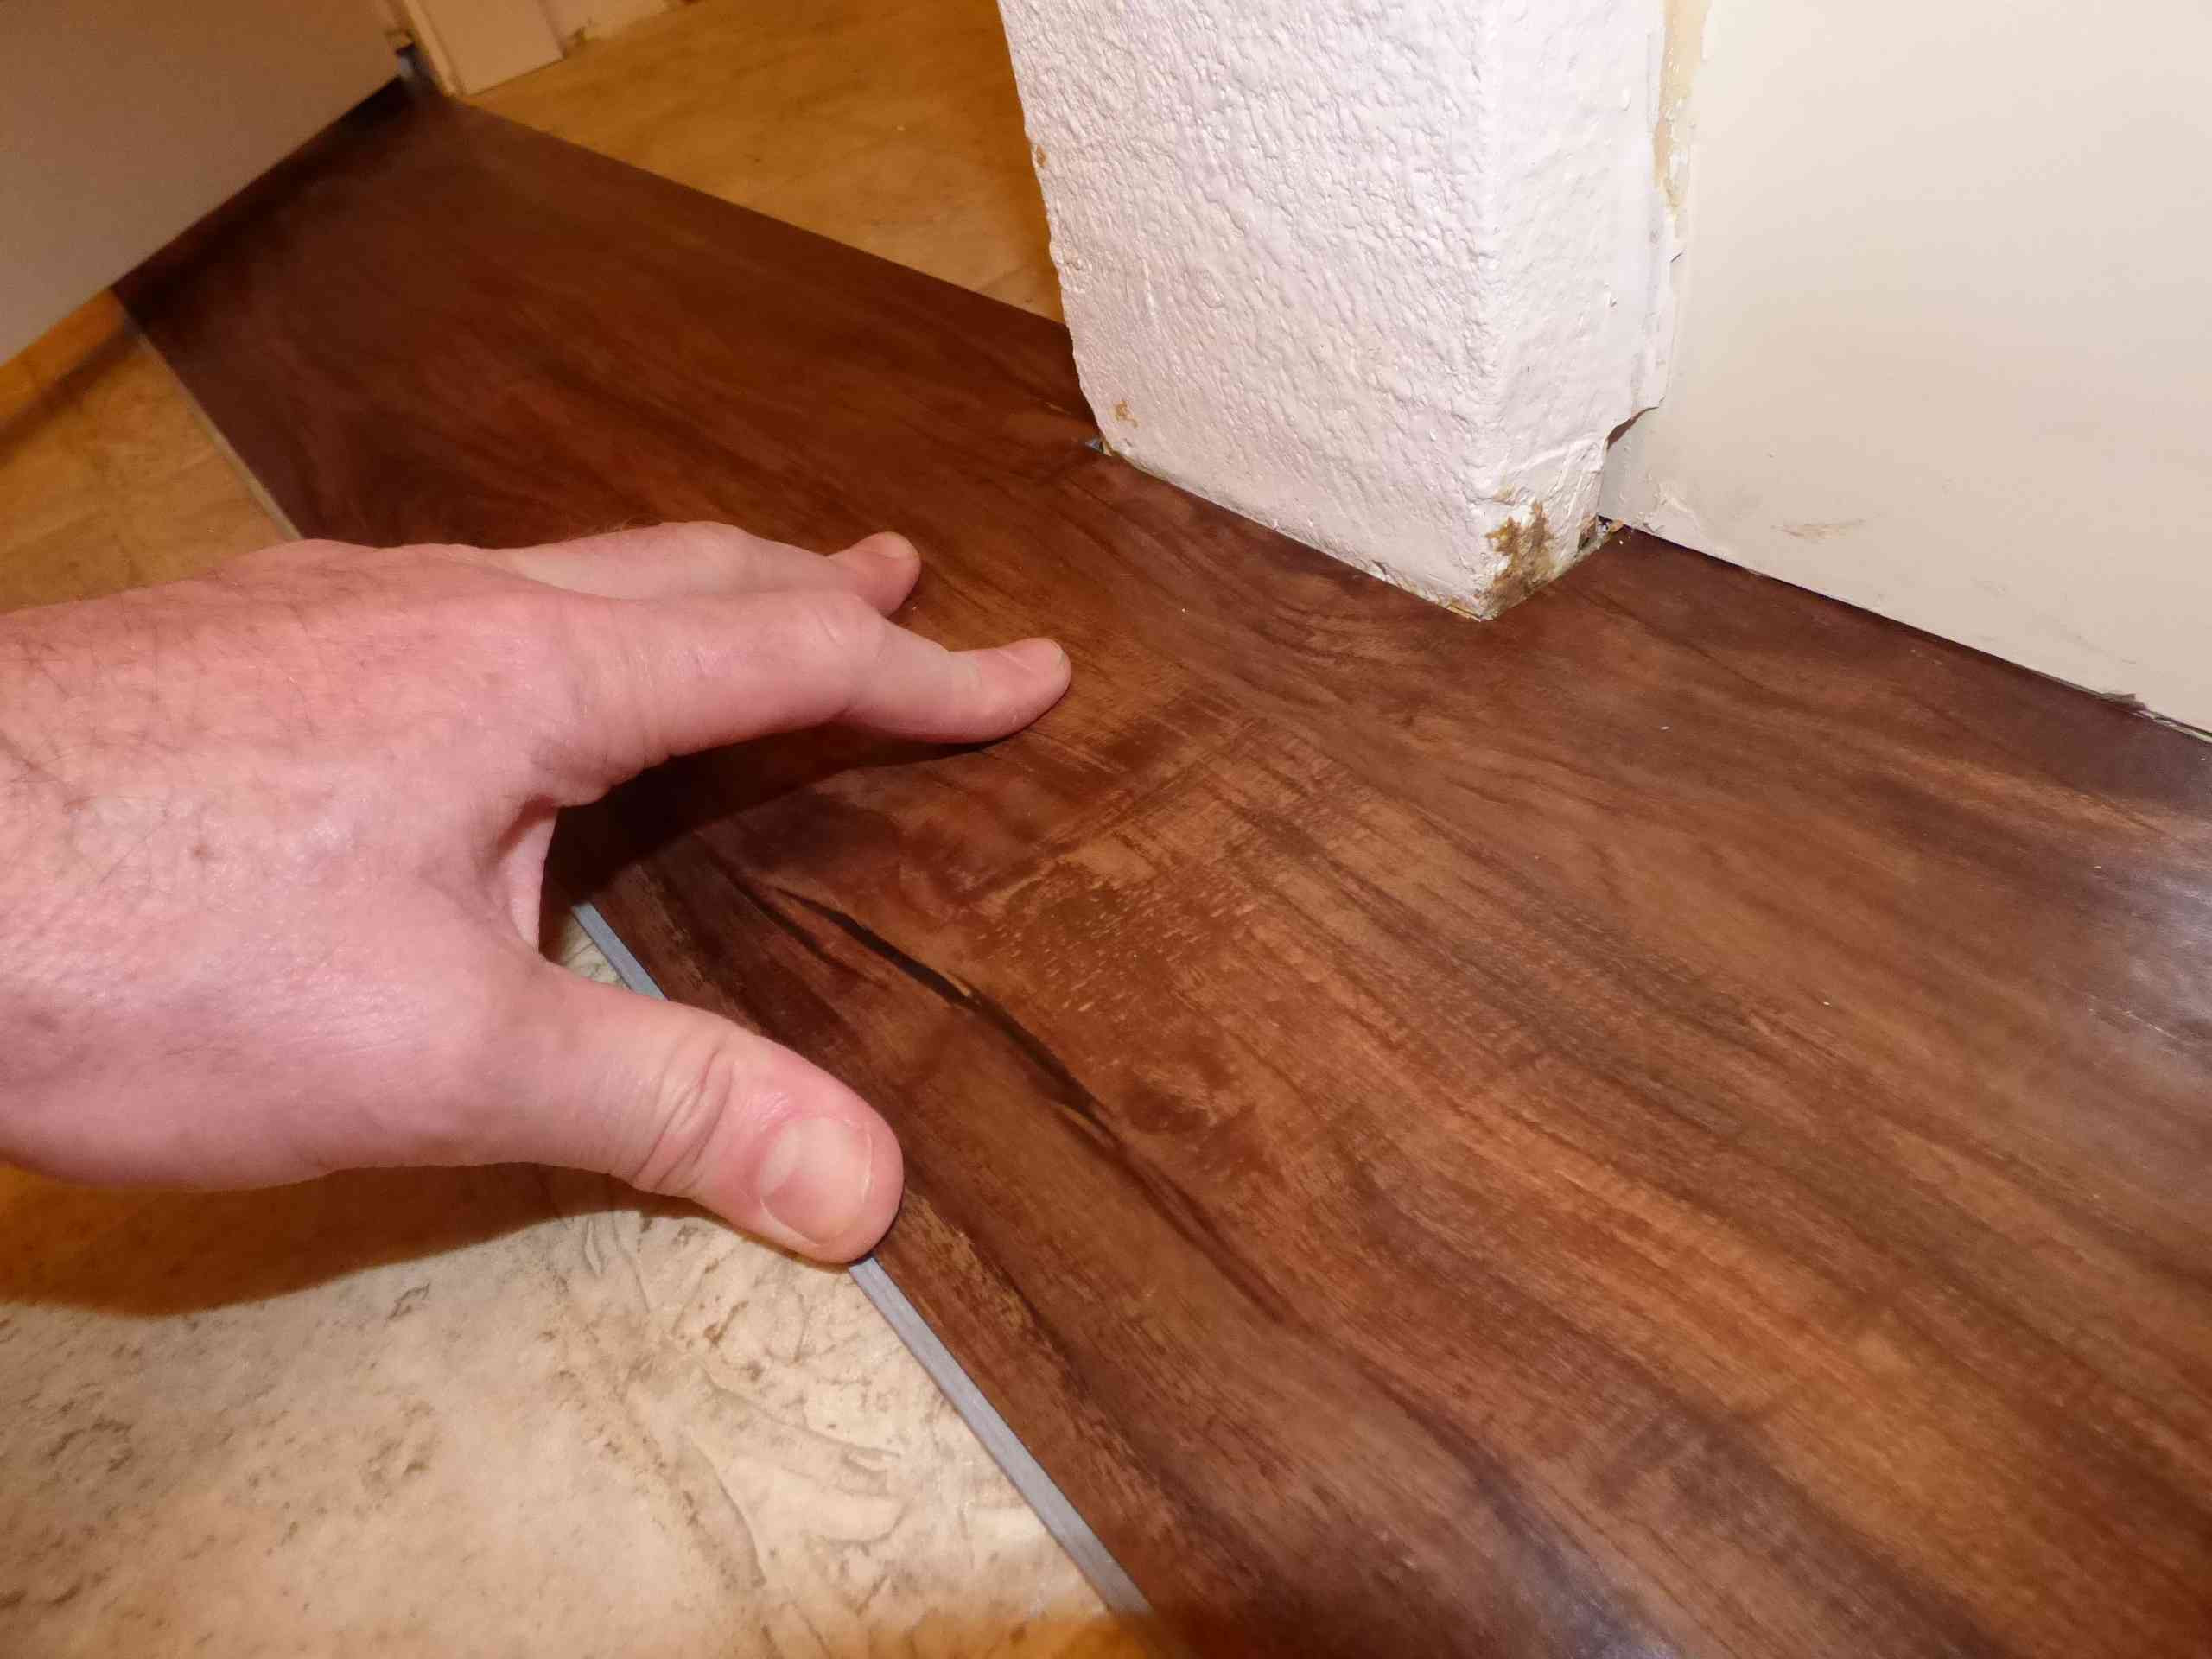 30 Lovely How to Install Hardwood Floors Video 2024 free download how to install hardwood floors video of its easy and fast to install plank vinyl flooring intended for fitting plank around protrusions 56a4a04f3df78cf7728350a3 jpg